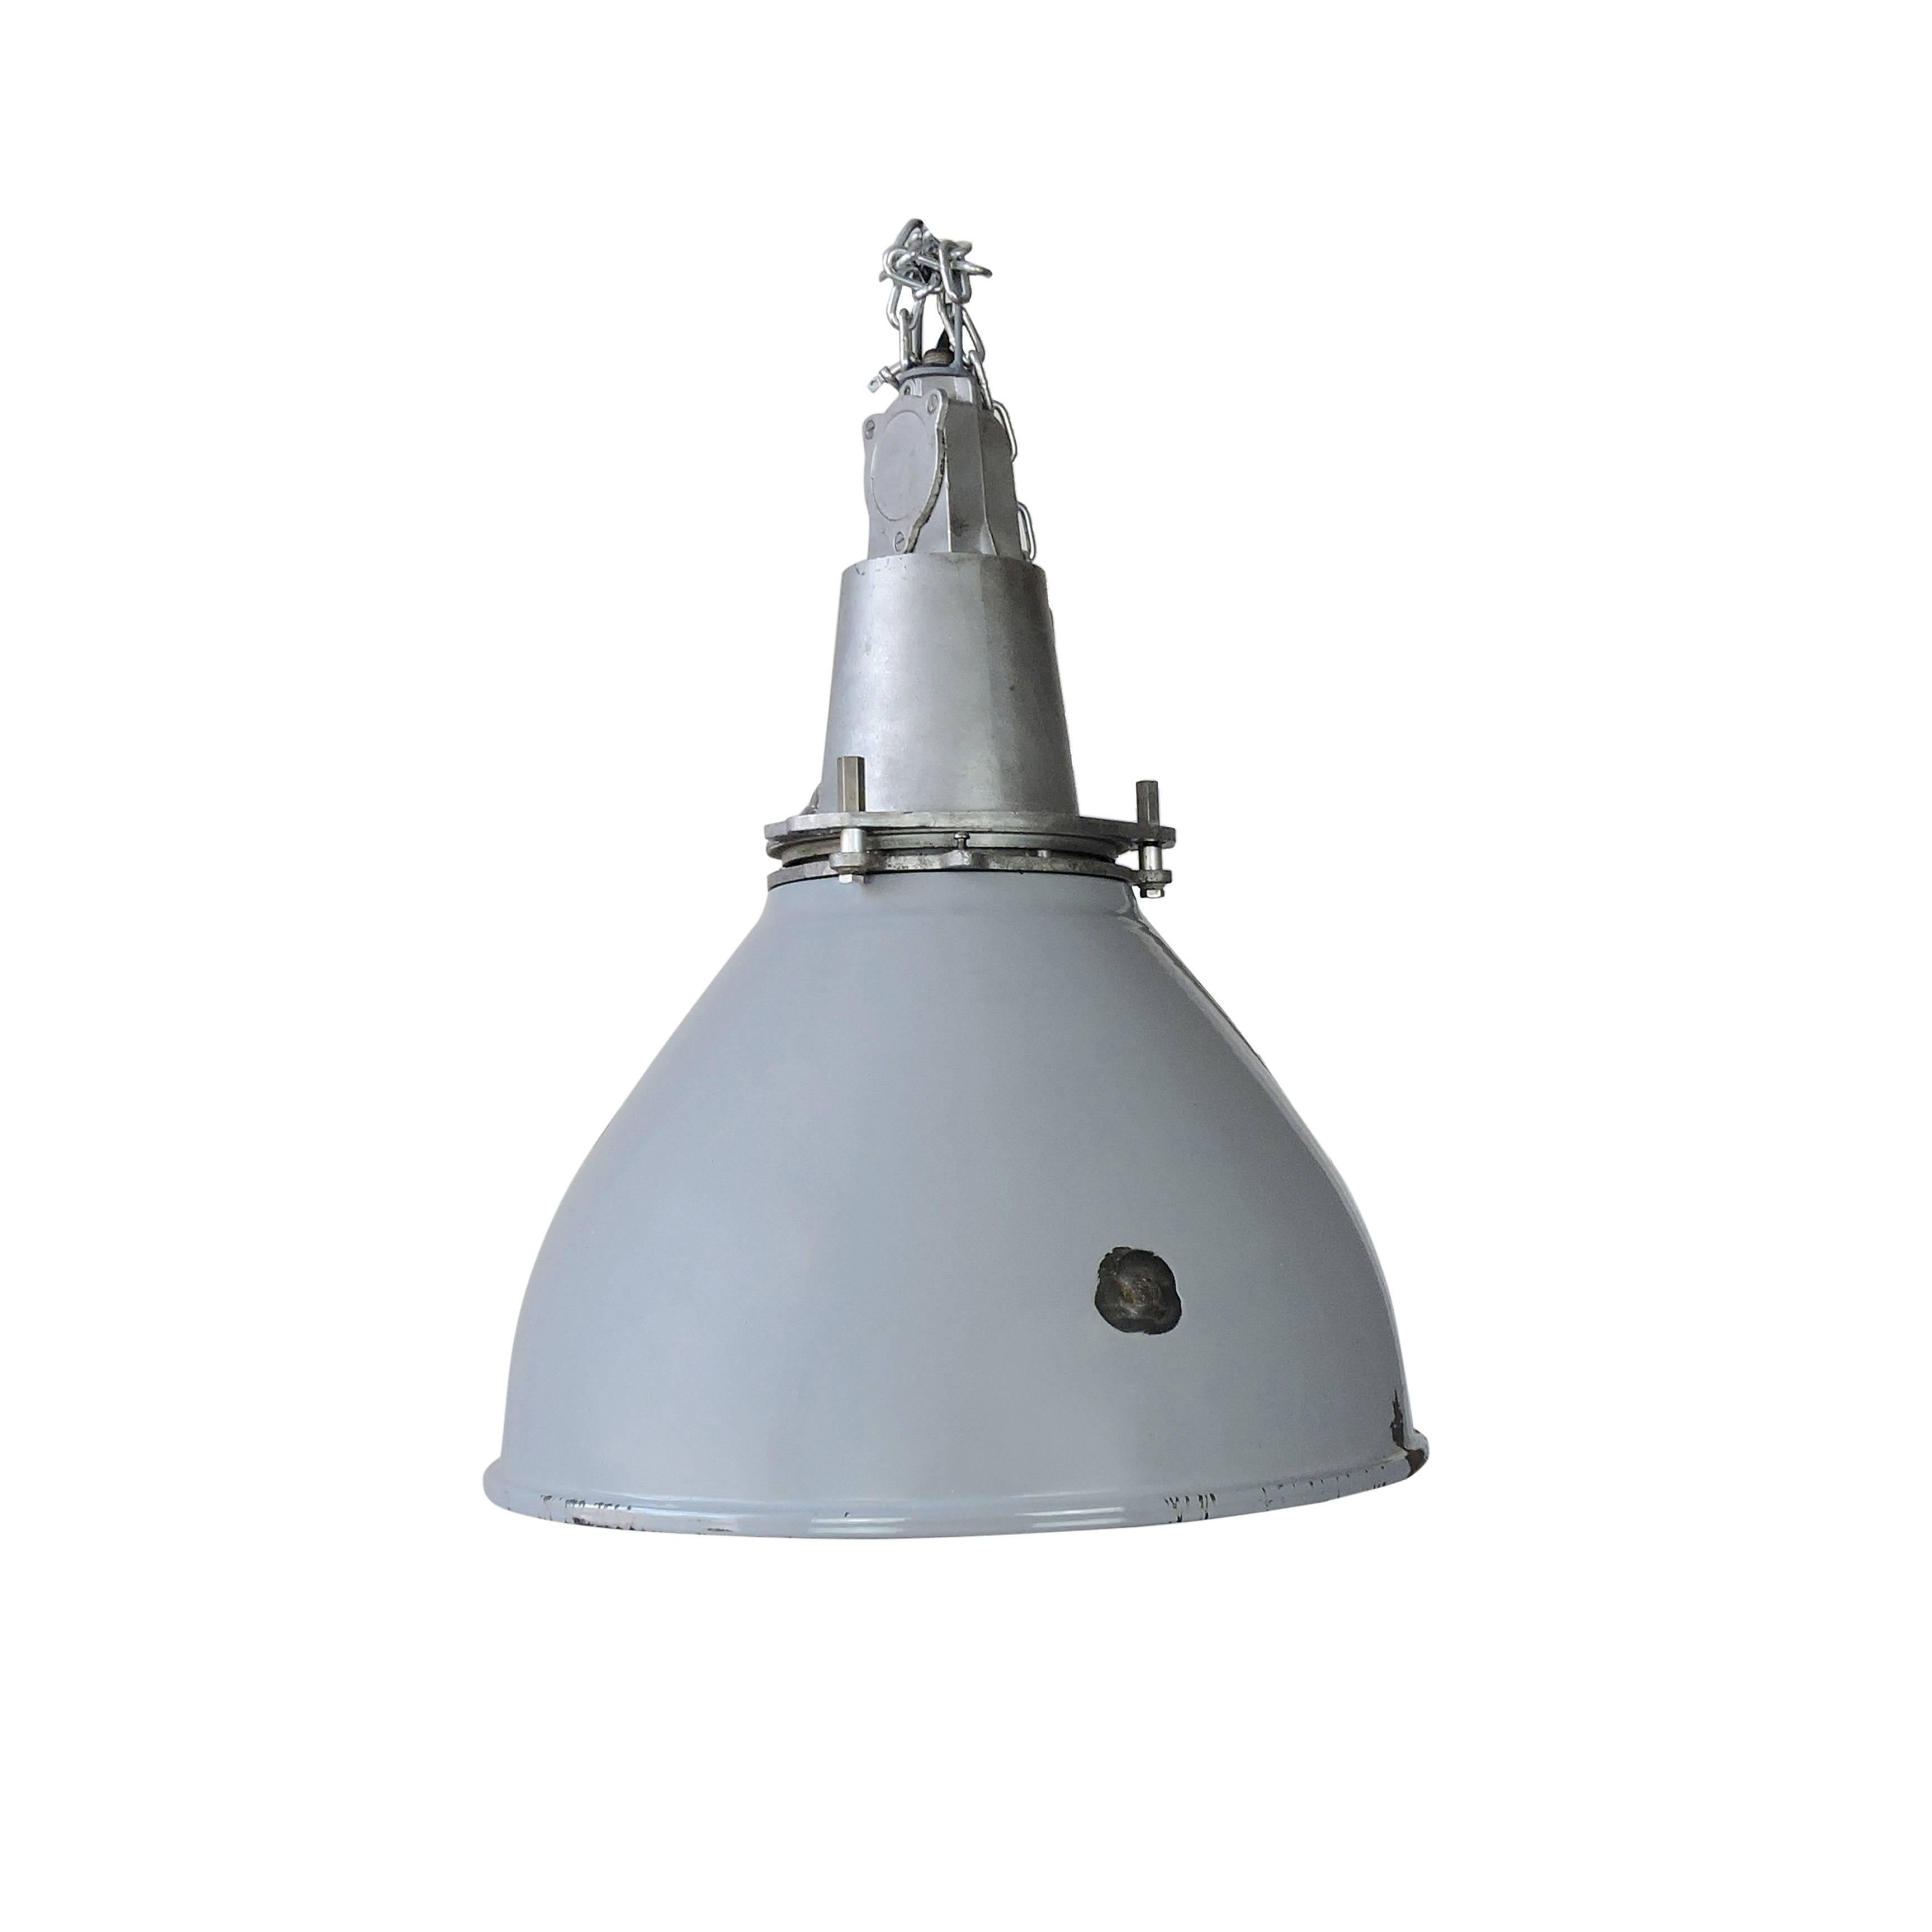 A Classic British vintage Industrial lamp with grey enamel featuring a white interior.